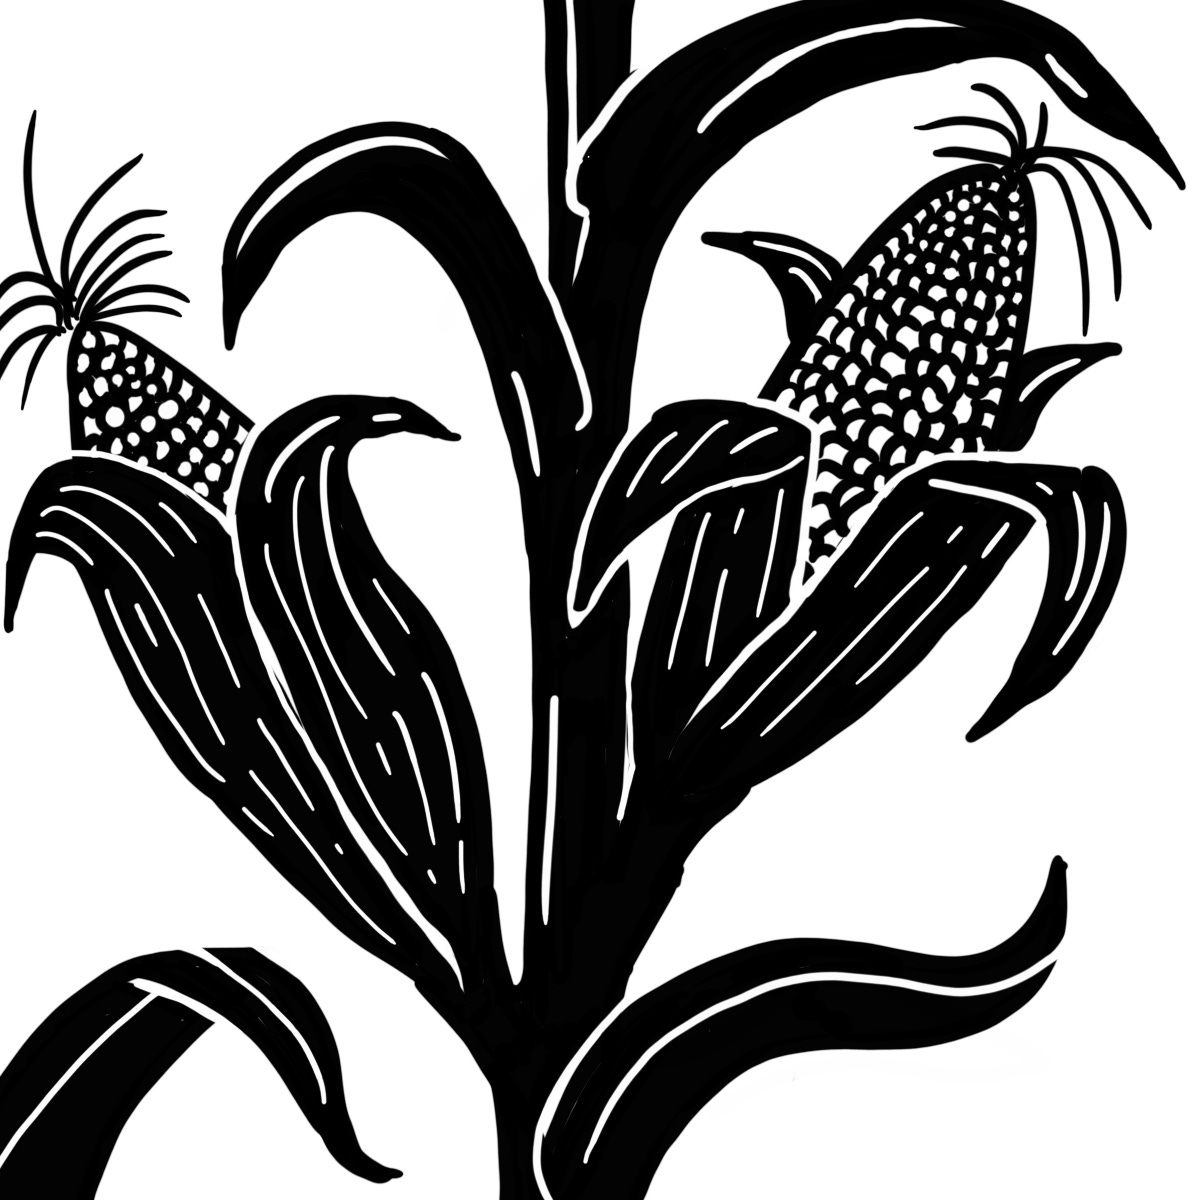 sketch of ripe maize on the stalk